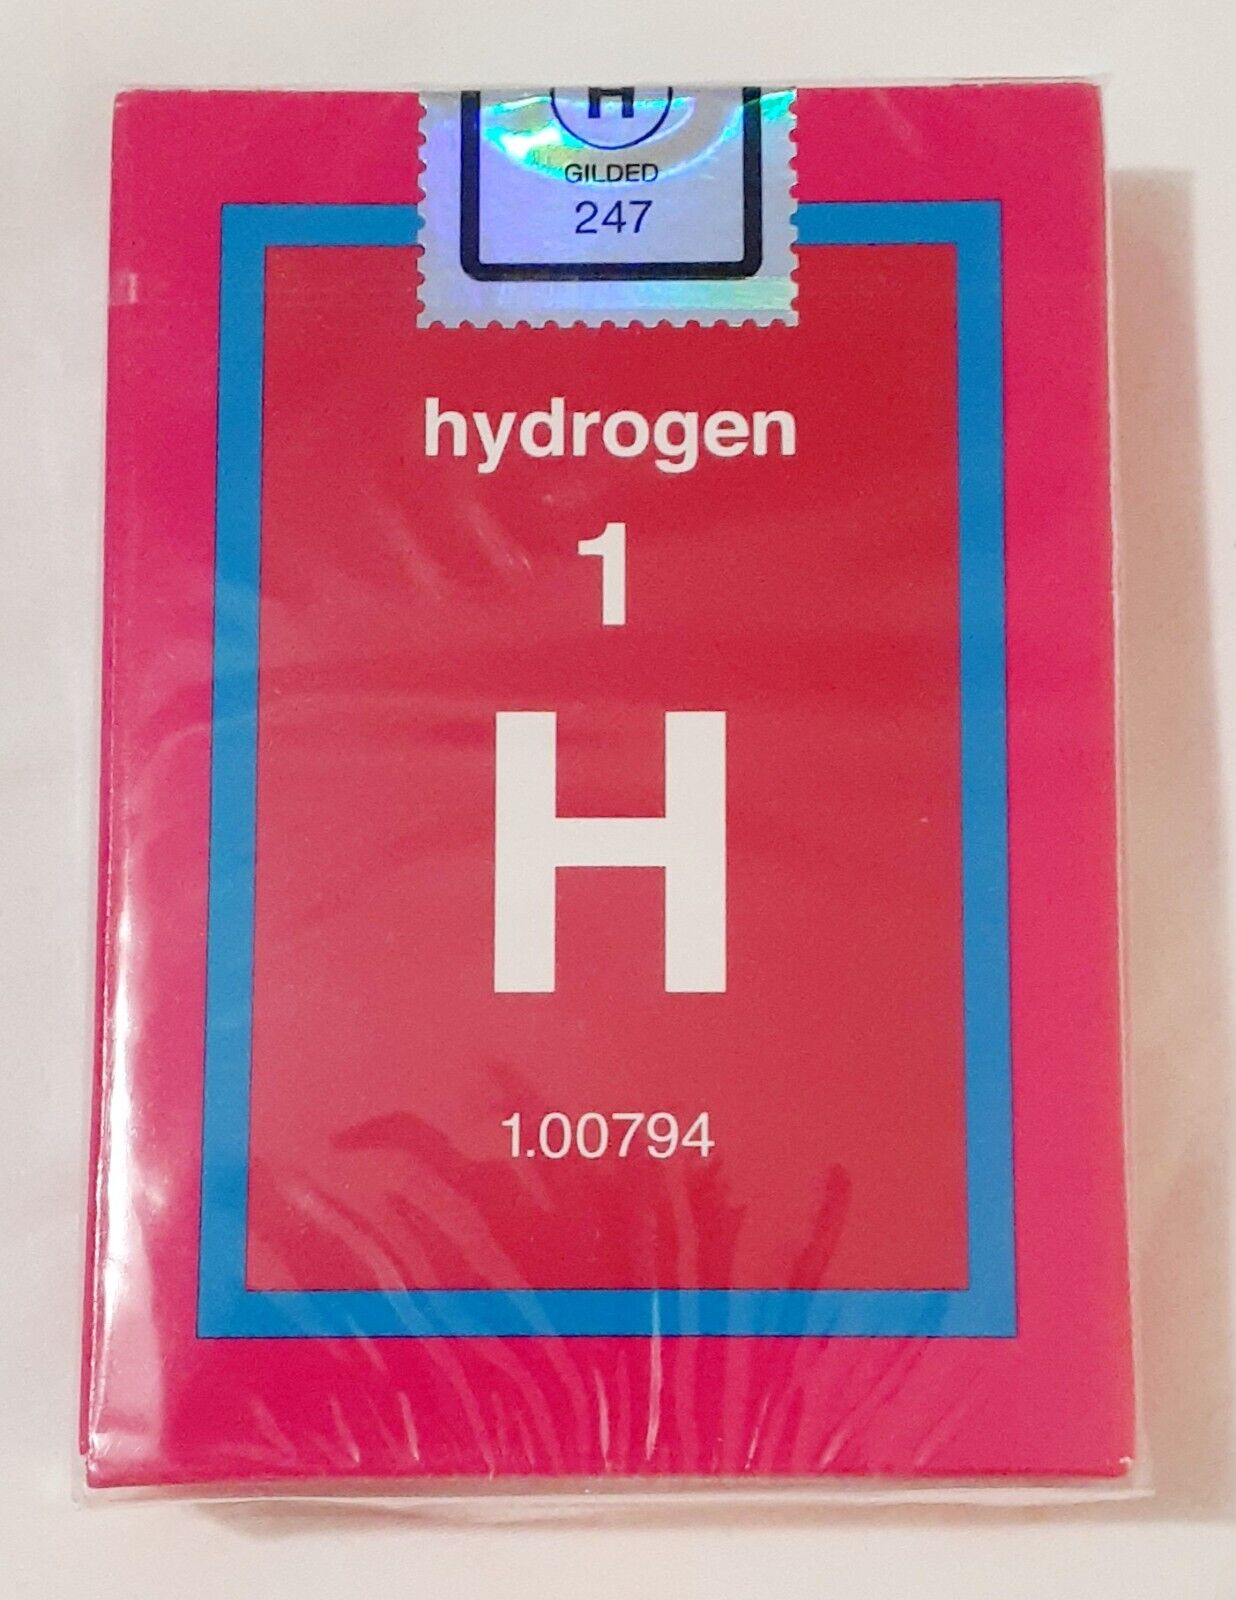 ELEMENTAL HYDROGEN PLAYING CARDS 1.00794 BRAND NEW SEALED MADE IN USA NICK NISCO